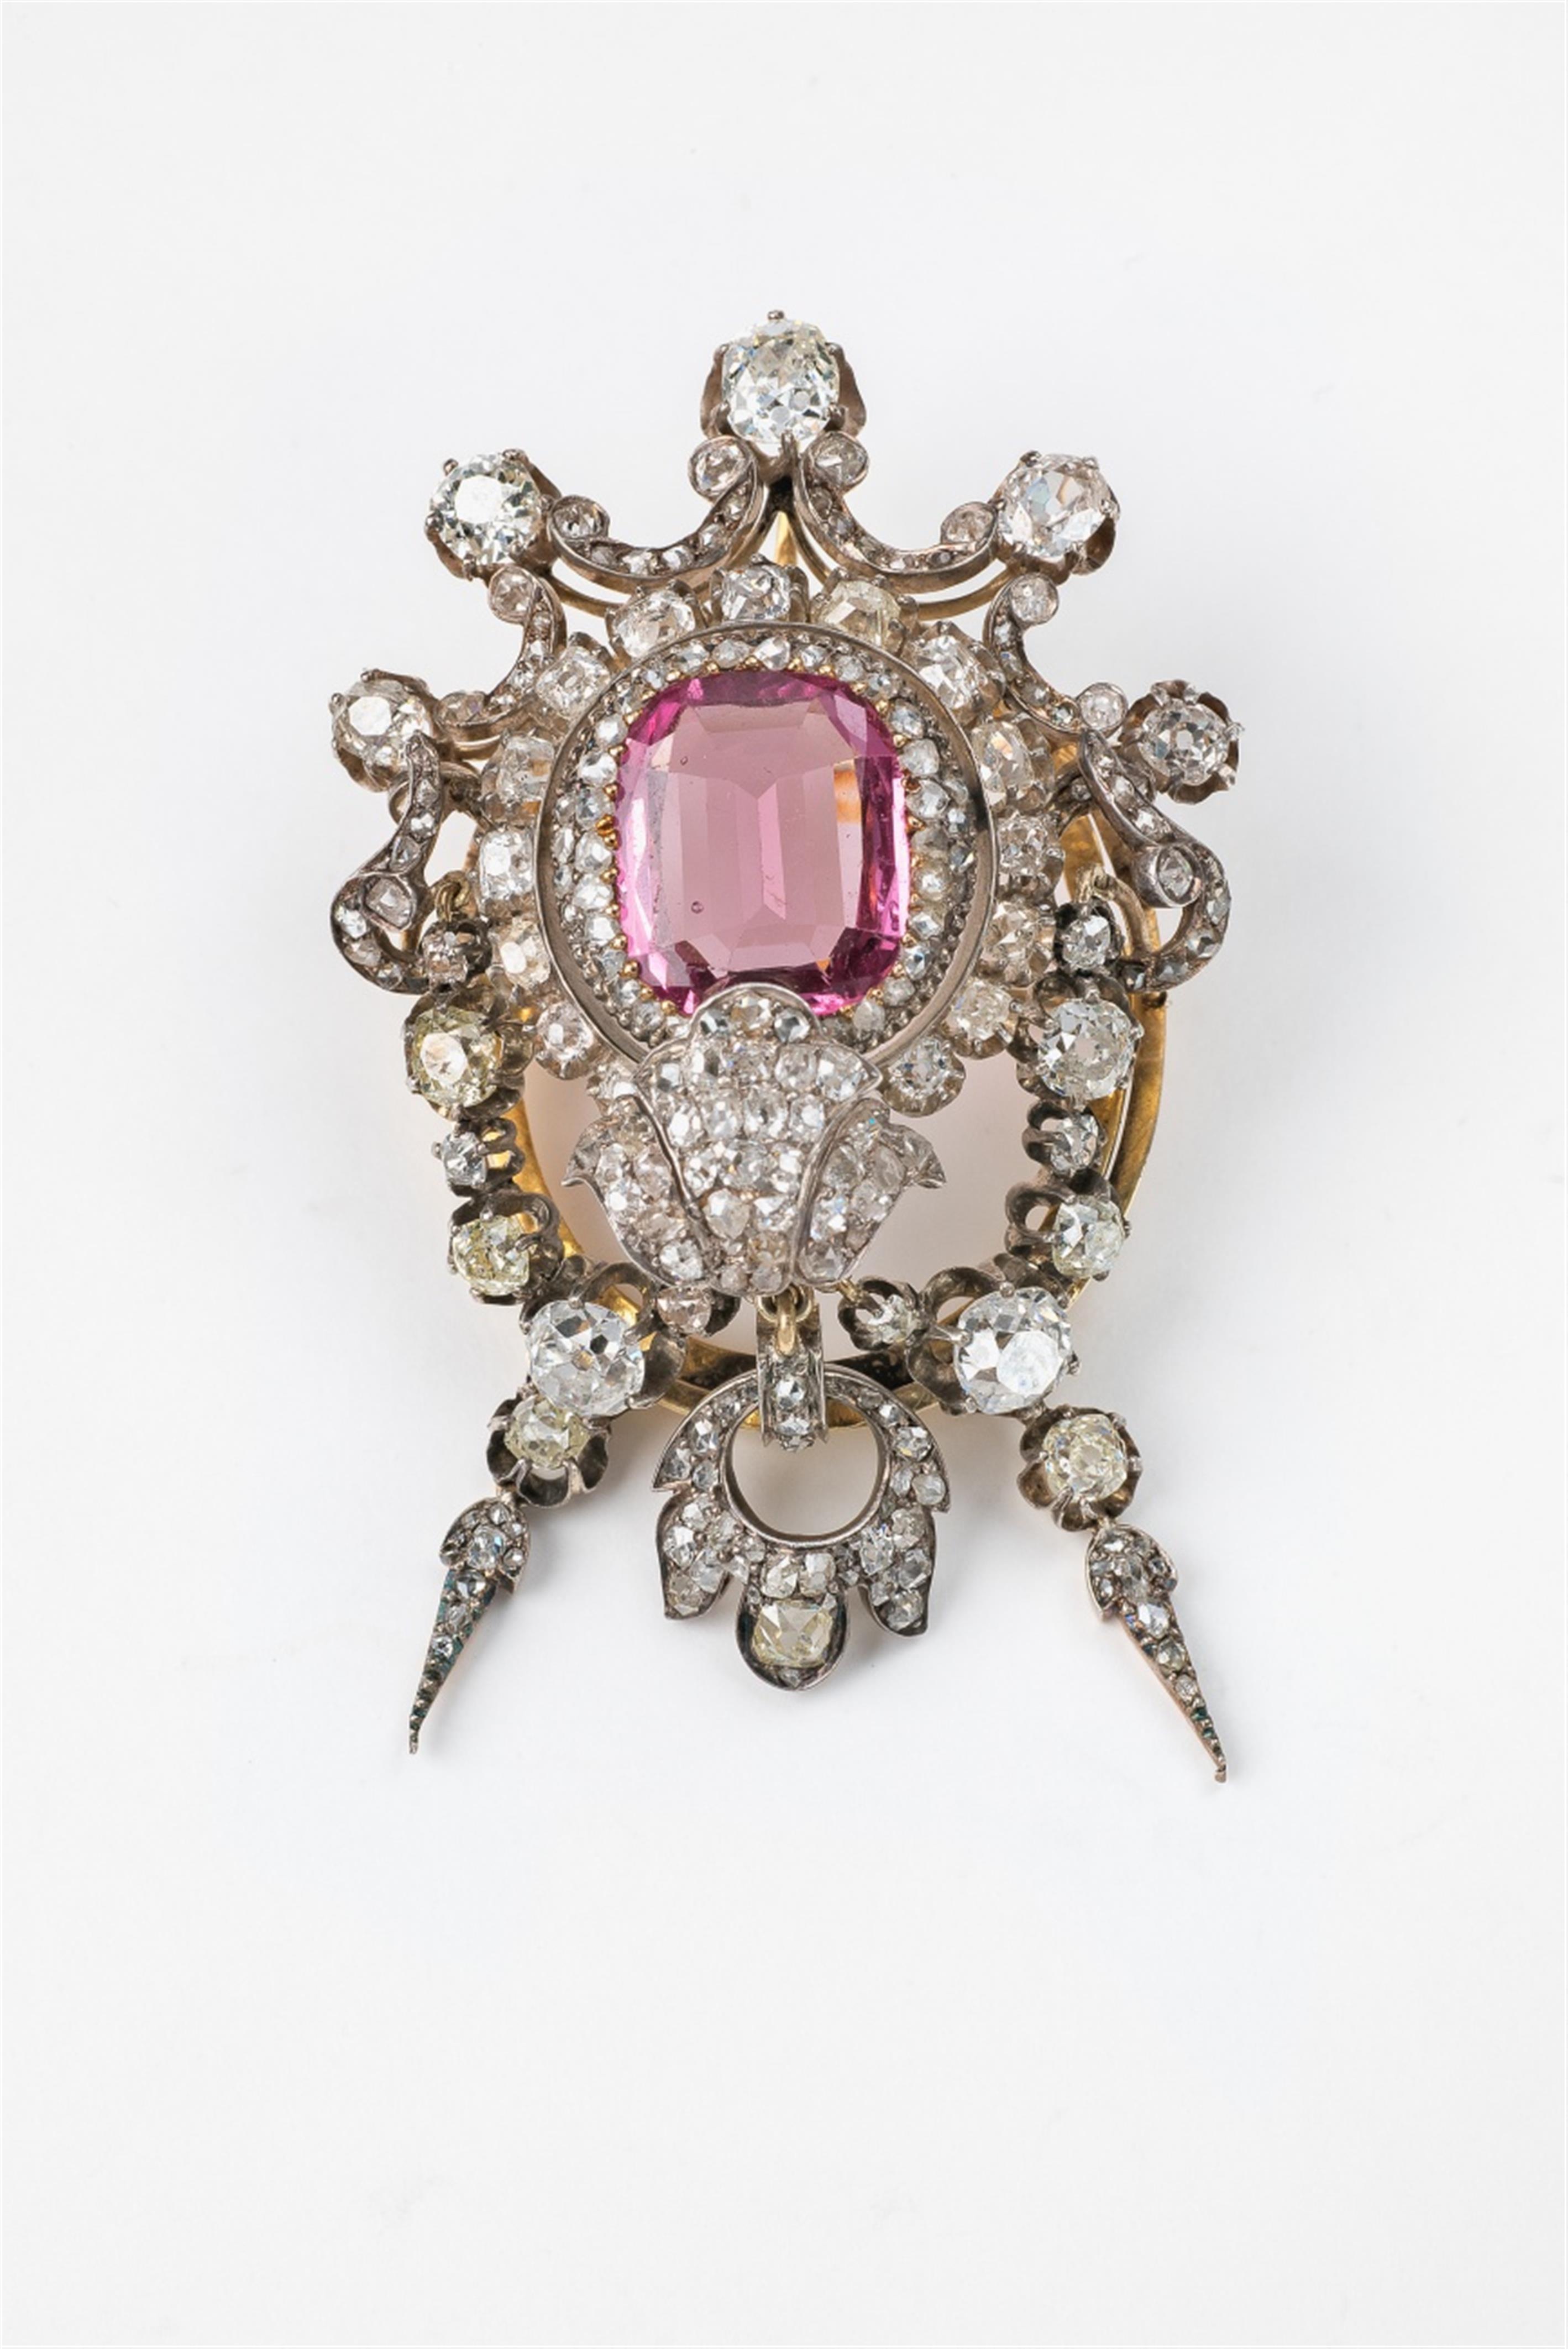 A 14 kt gold diamond Belle Epoque brooch with a pink spinel - image-1